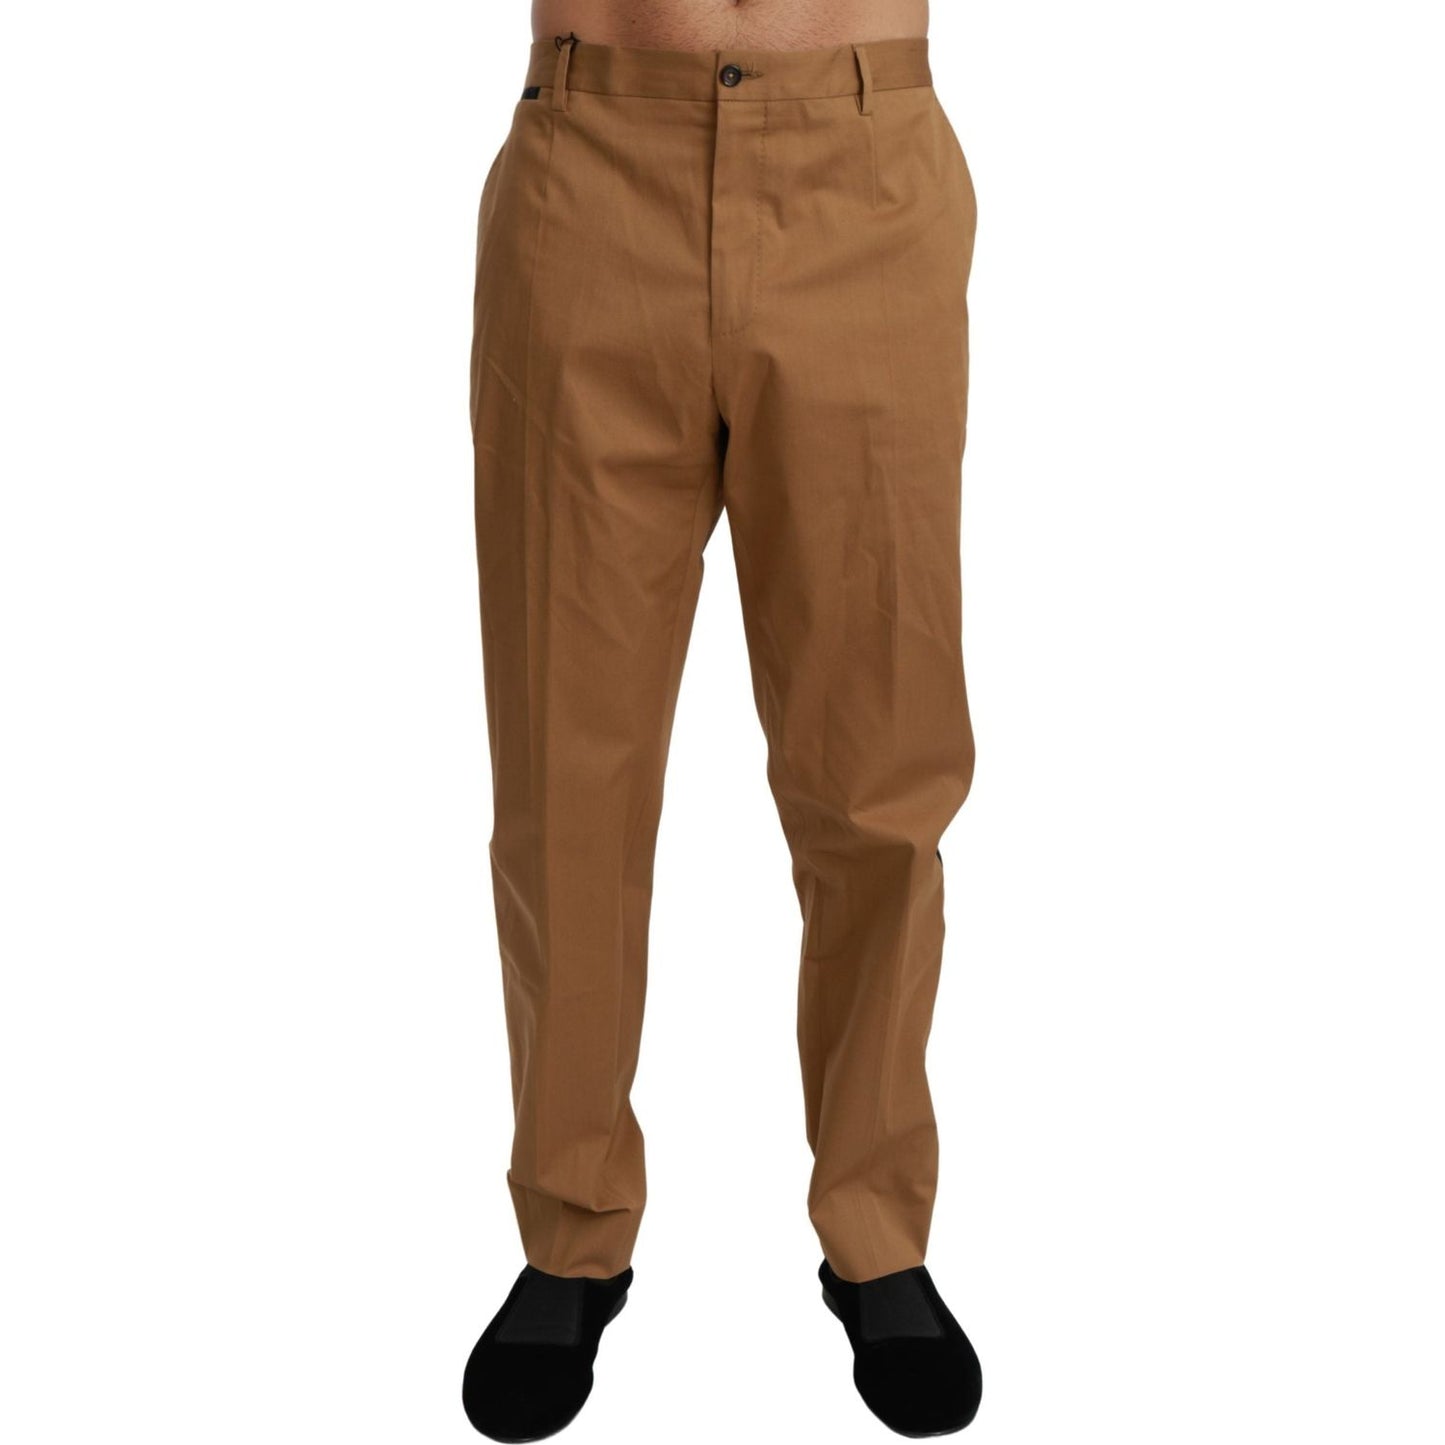 Dolce & Gabbana Elegant Slim Fit Brown Casual Pants brown-chinos-trousers-cotton-stretch-pants IMG_3313-scaled-c1e8525b-7e4.jpg